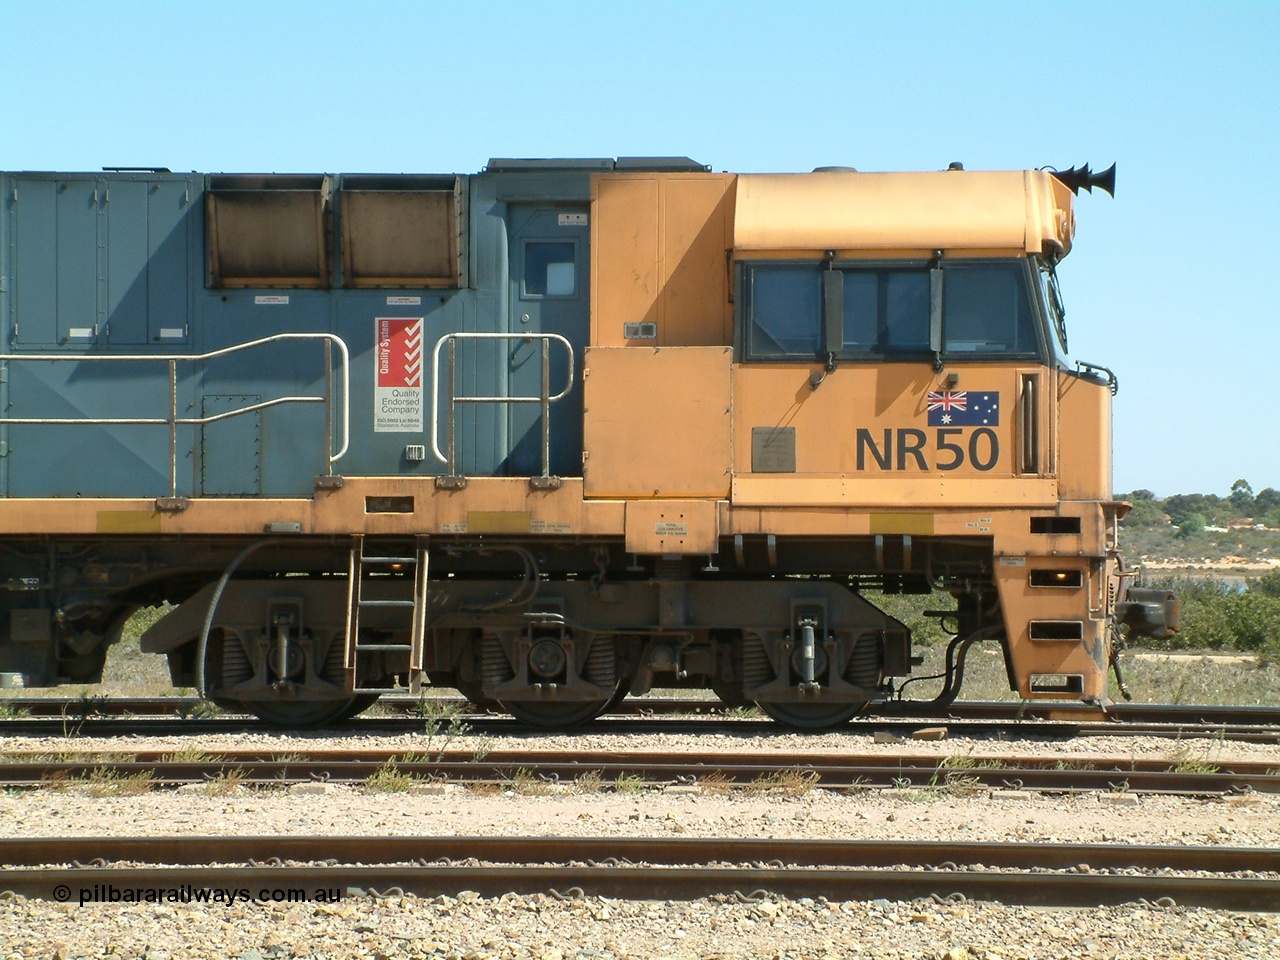 030404 125337
Port Augusta Spencer Junction yard, a Perth bound intermodal awaits departure time on 13 Road behind National Rail NR class units built by Goninan as GE Cv40-9i models, NR 50 serial 7250-08 / 97-252. 4th April 2003.
Keywords: NR-class;NR50;Goninan;GE;Cv40-9i;7250-08/97-252;